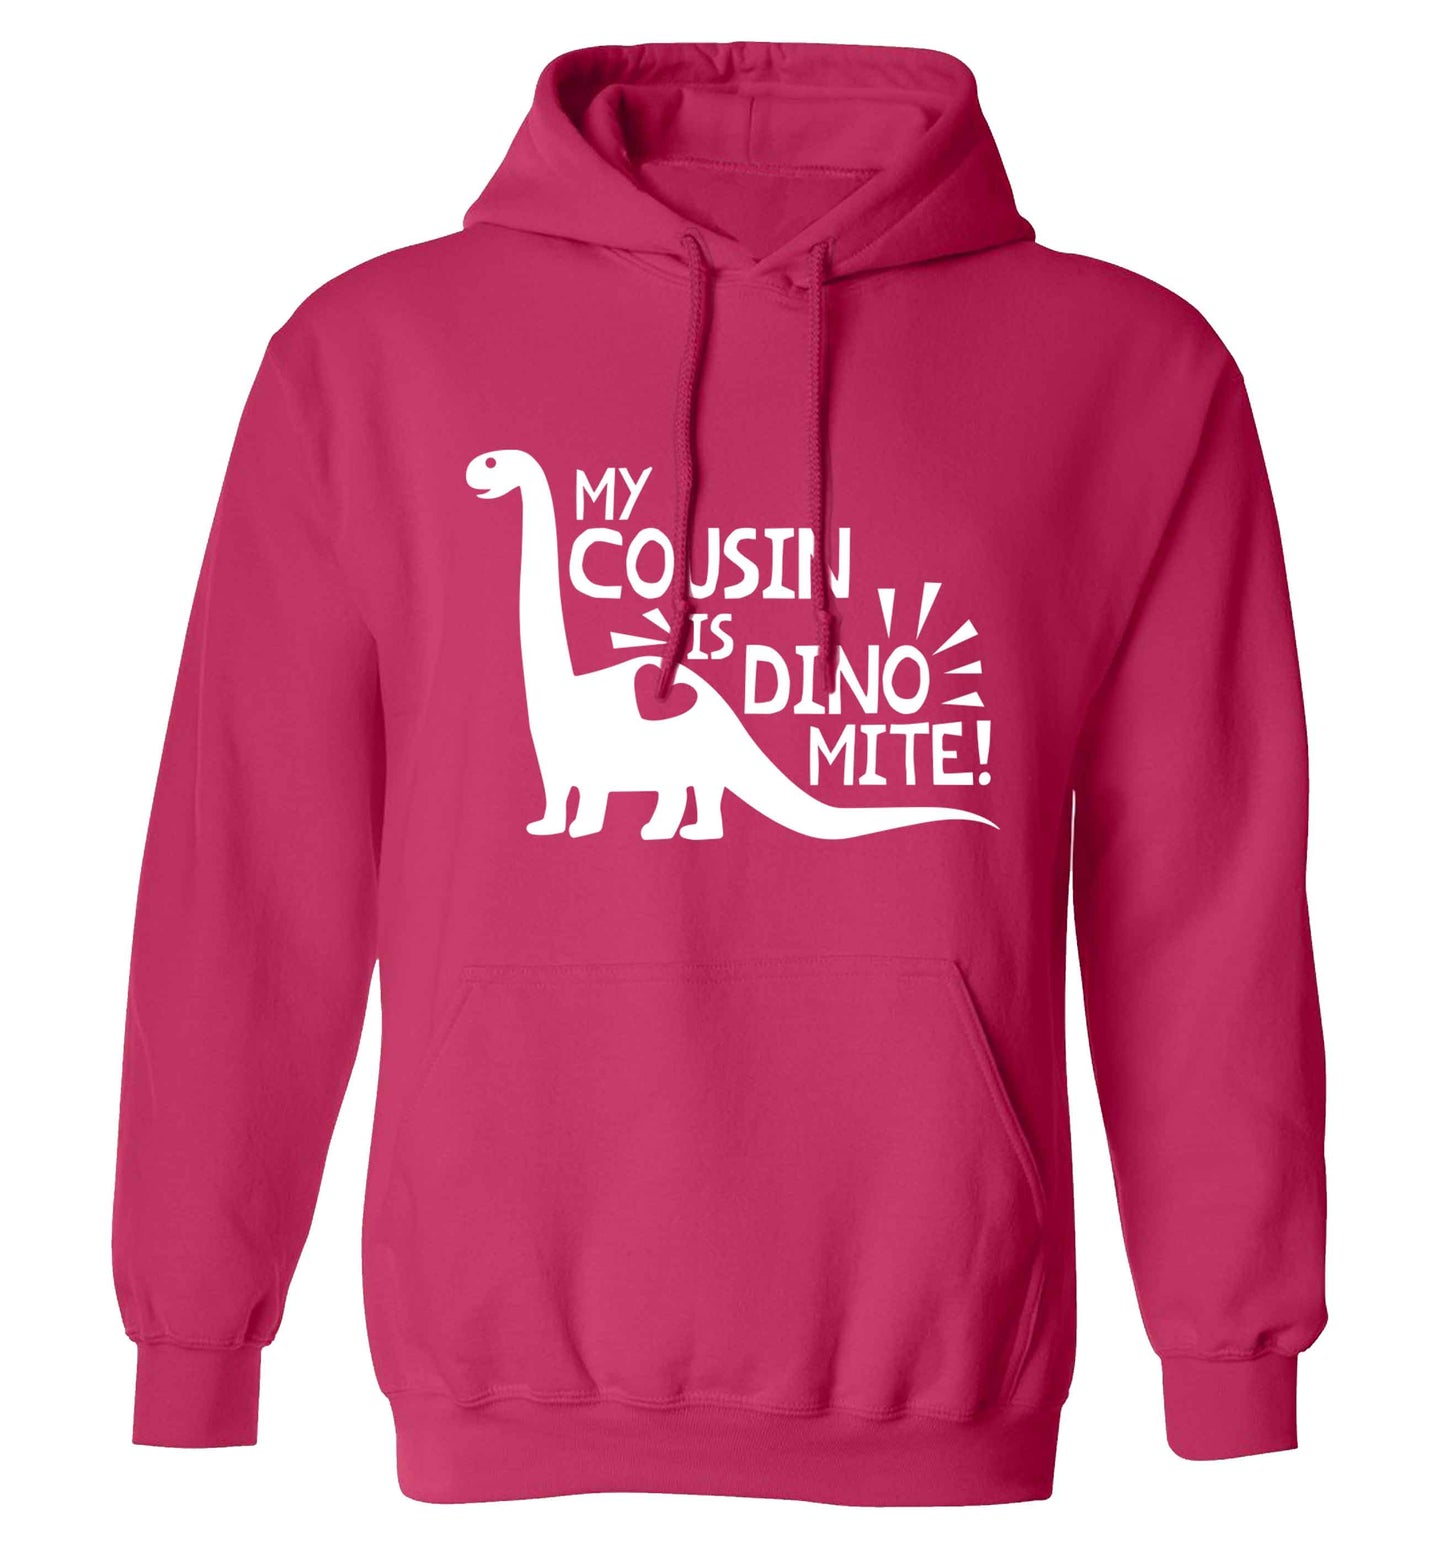 My cousin is dinomite! adults unisex pink hoodie 2XL